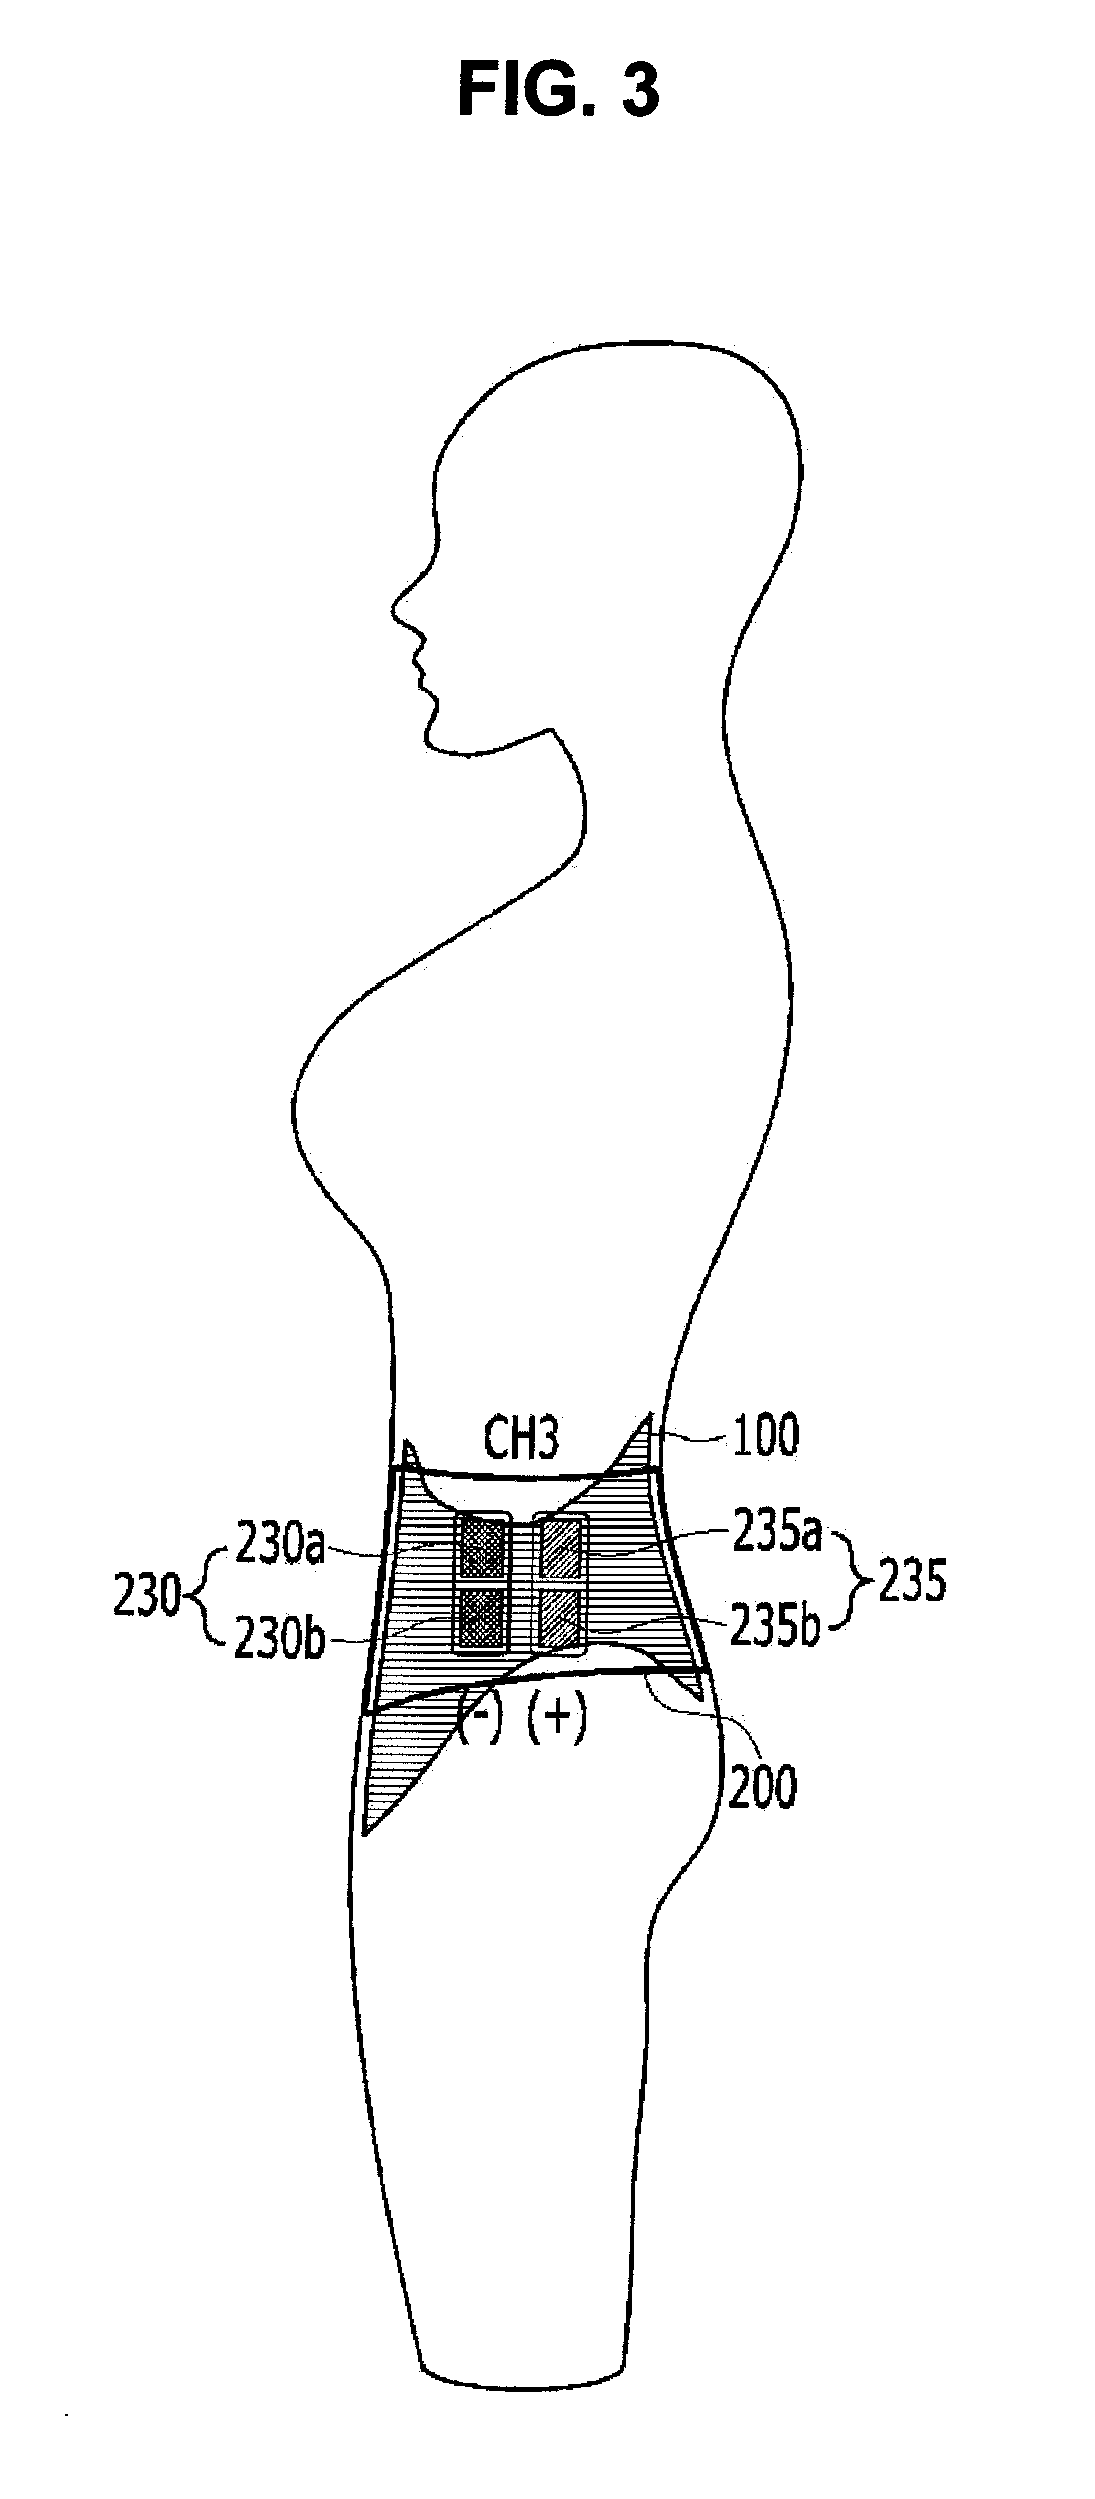 Drive device of electrode channel for strengthening core muscle of abdominal region